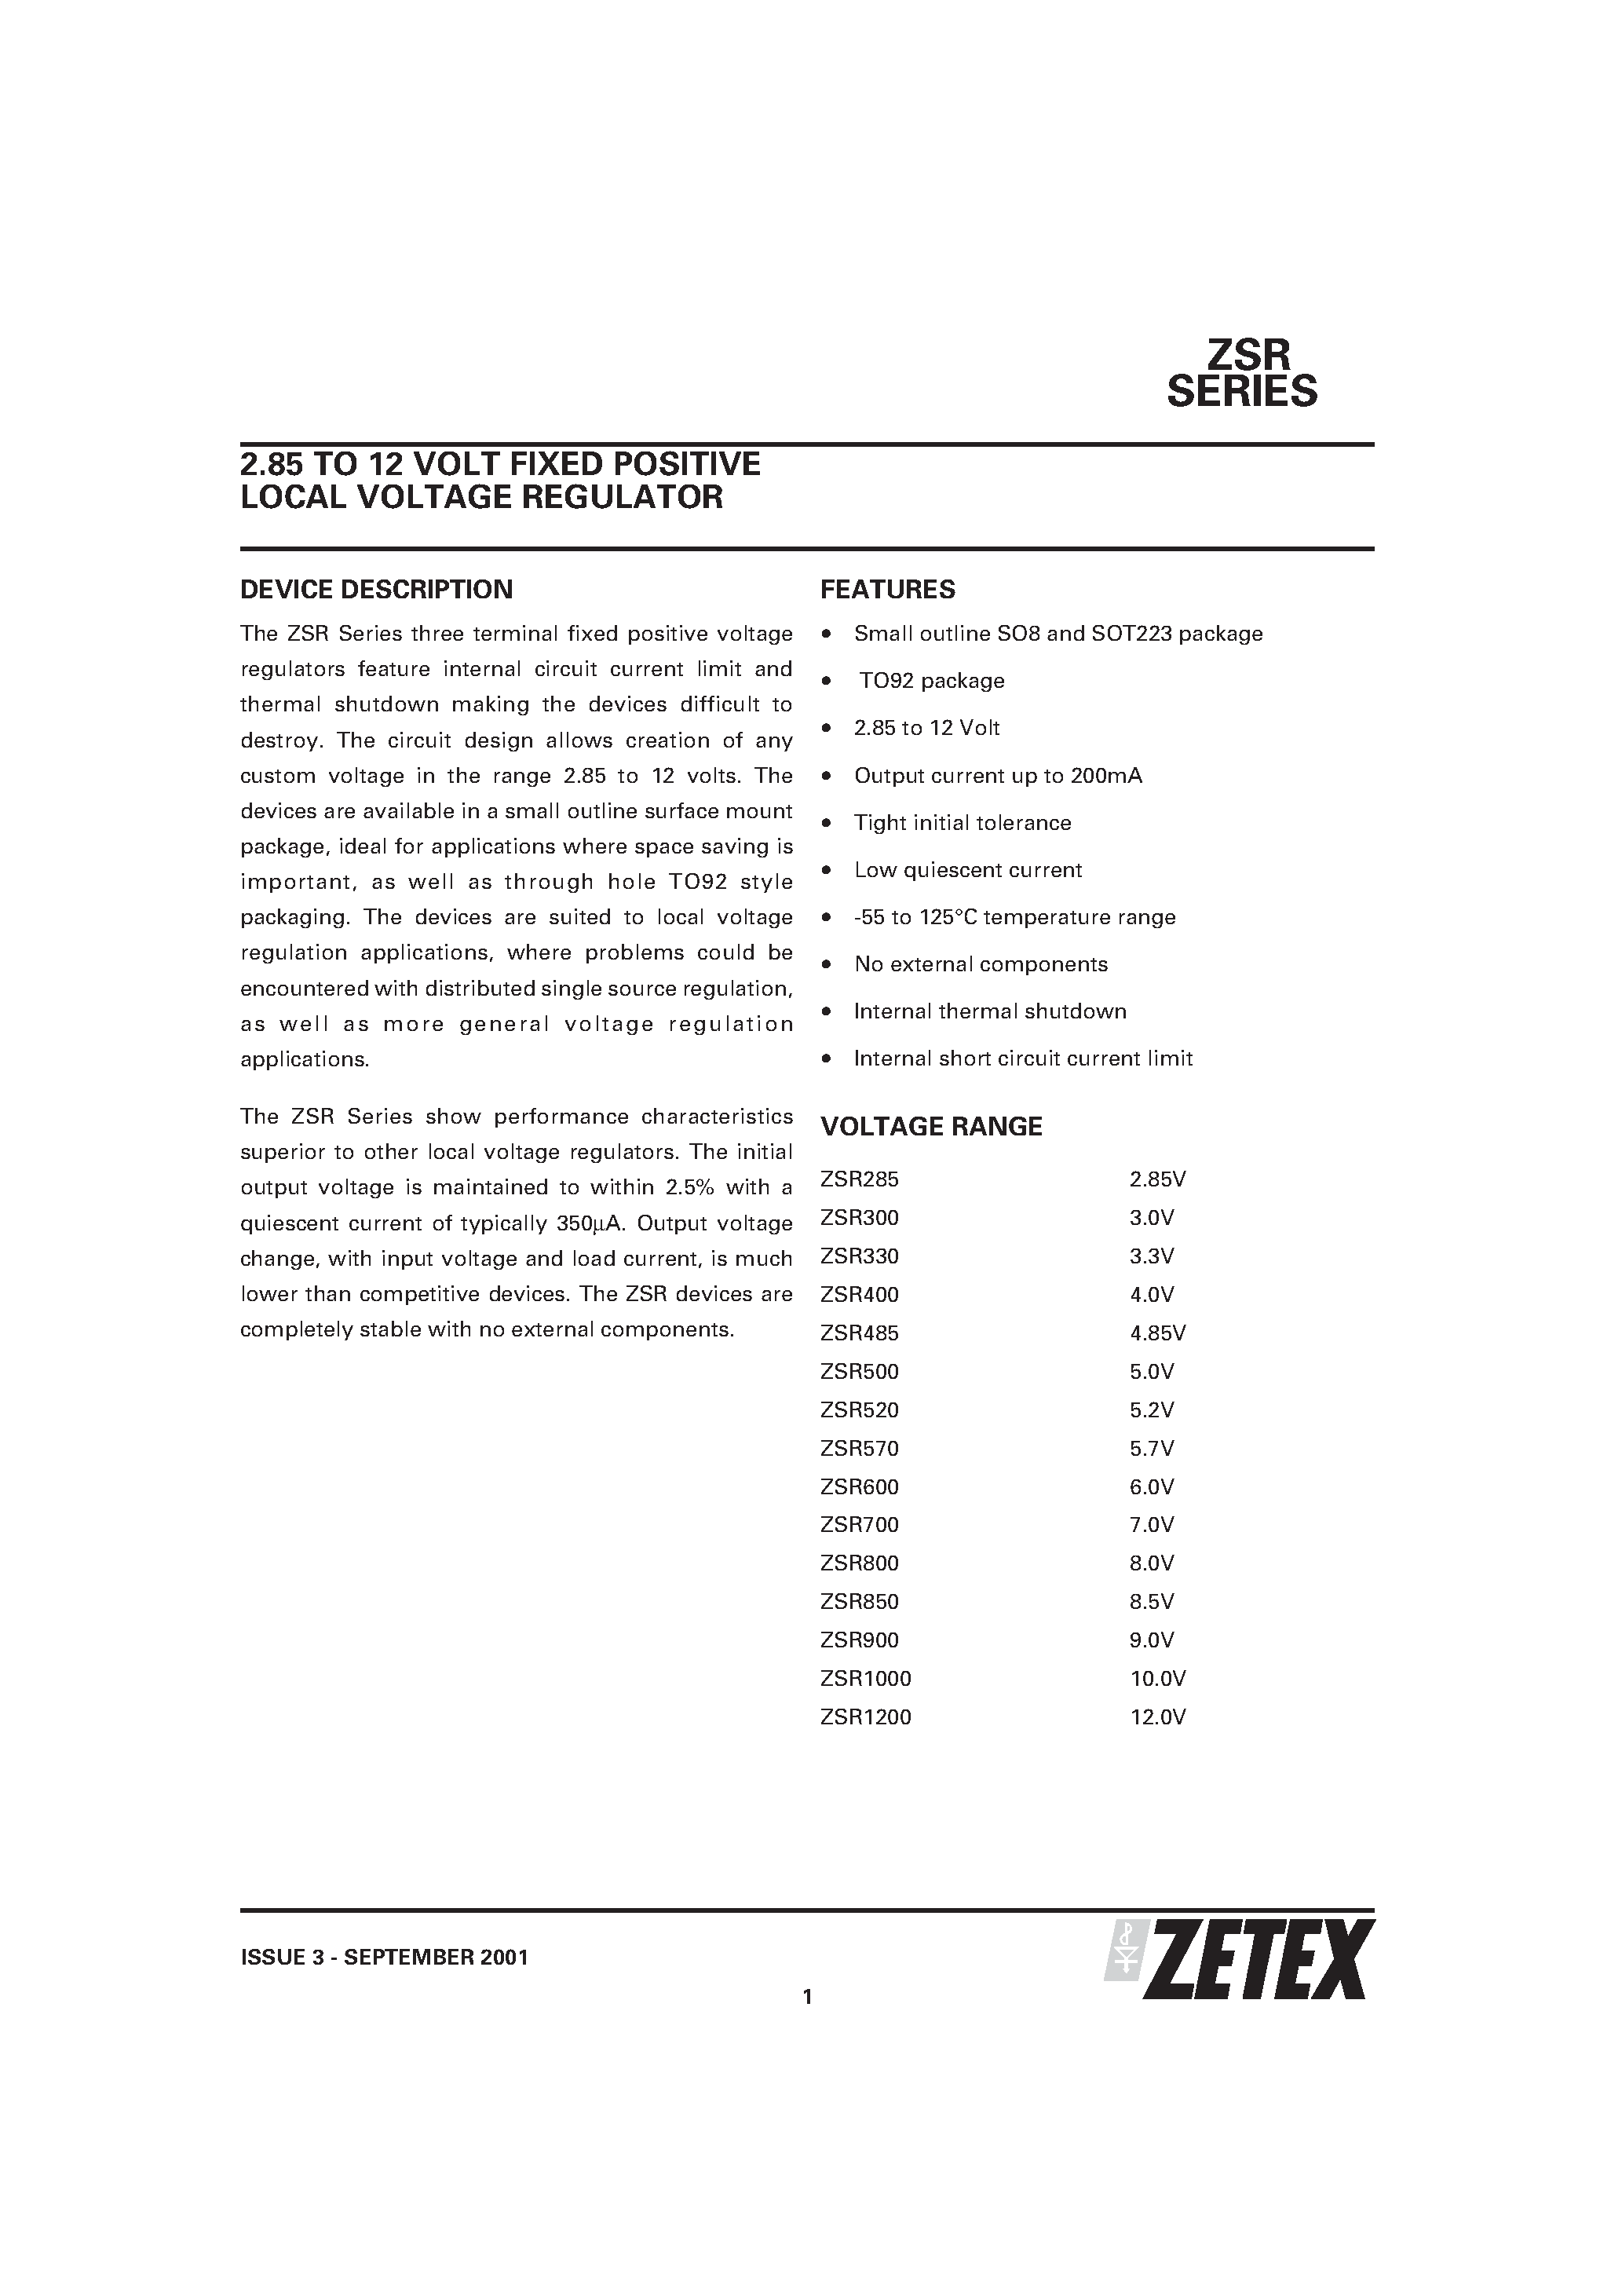 Datasheet ZSR1000 - 2.85 TO 12 VOLT FIXED POSITIVE LOCAL VOLTAGE REGULATOR page 1